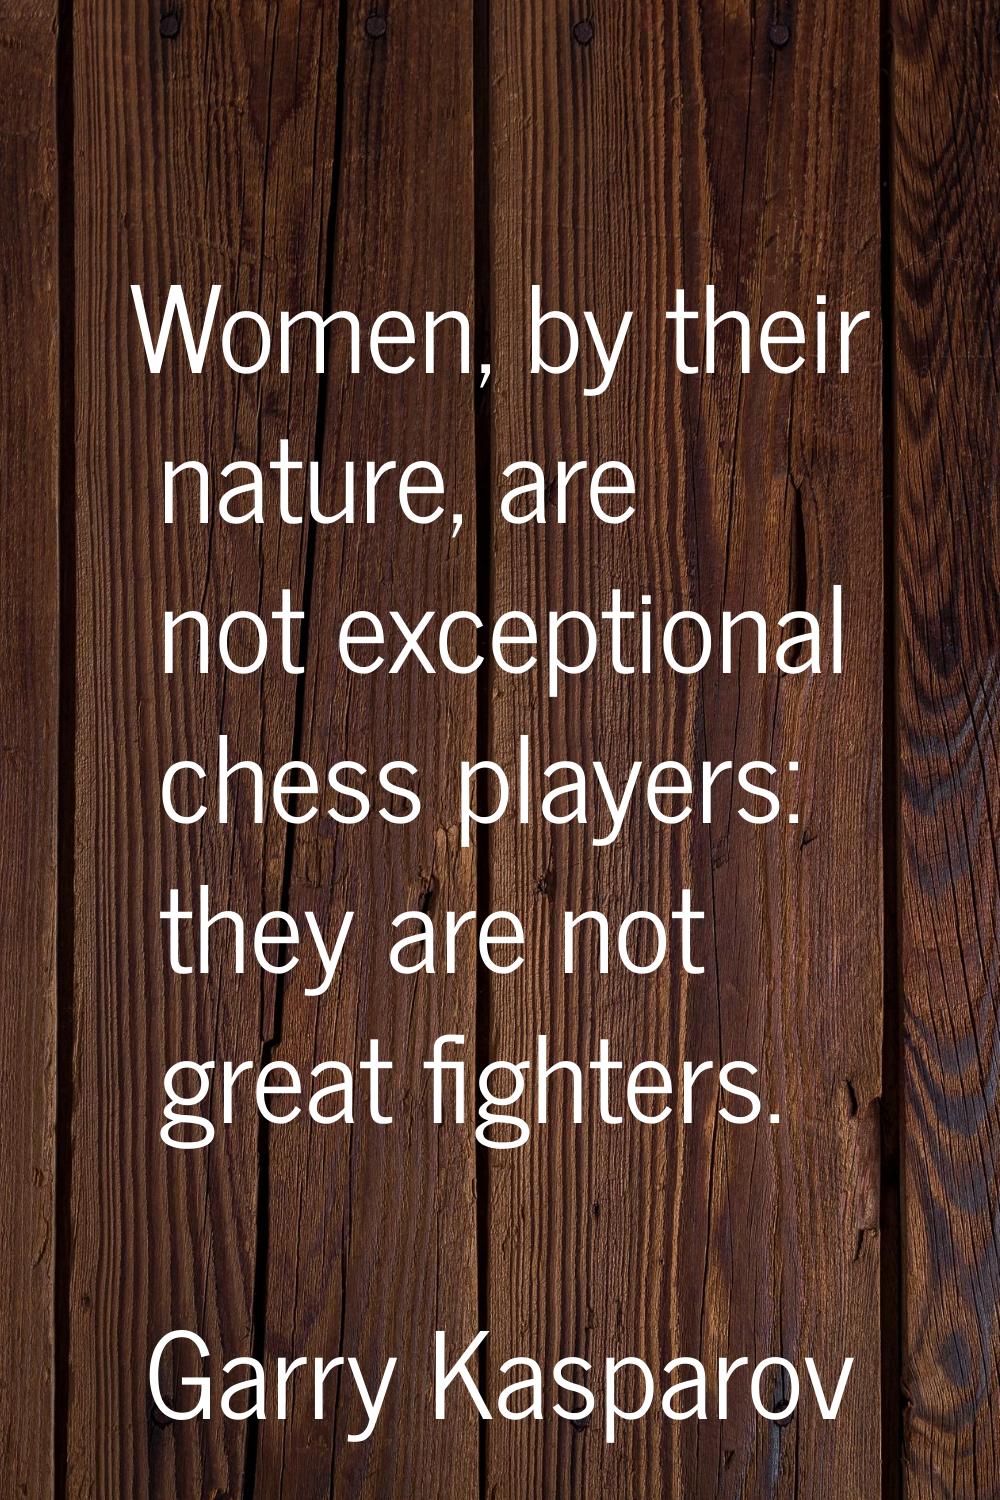 Women, by their nature, are not exceptional chess players: they are not great fighters.